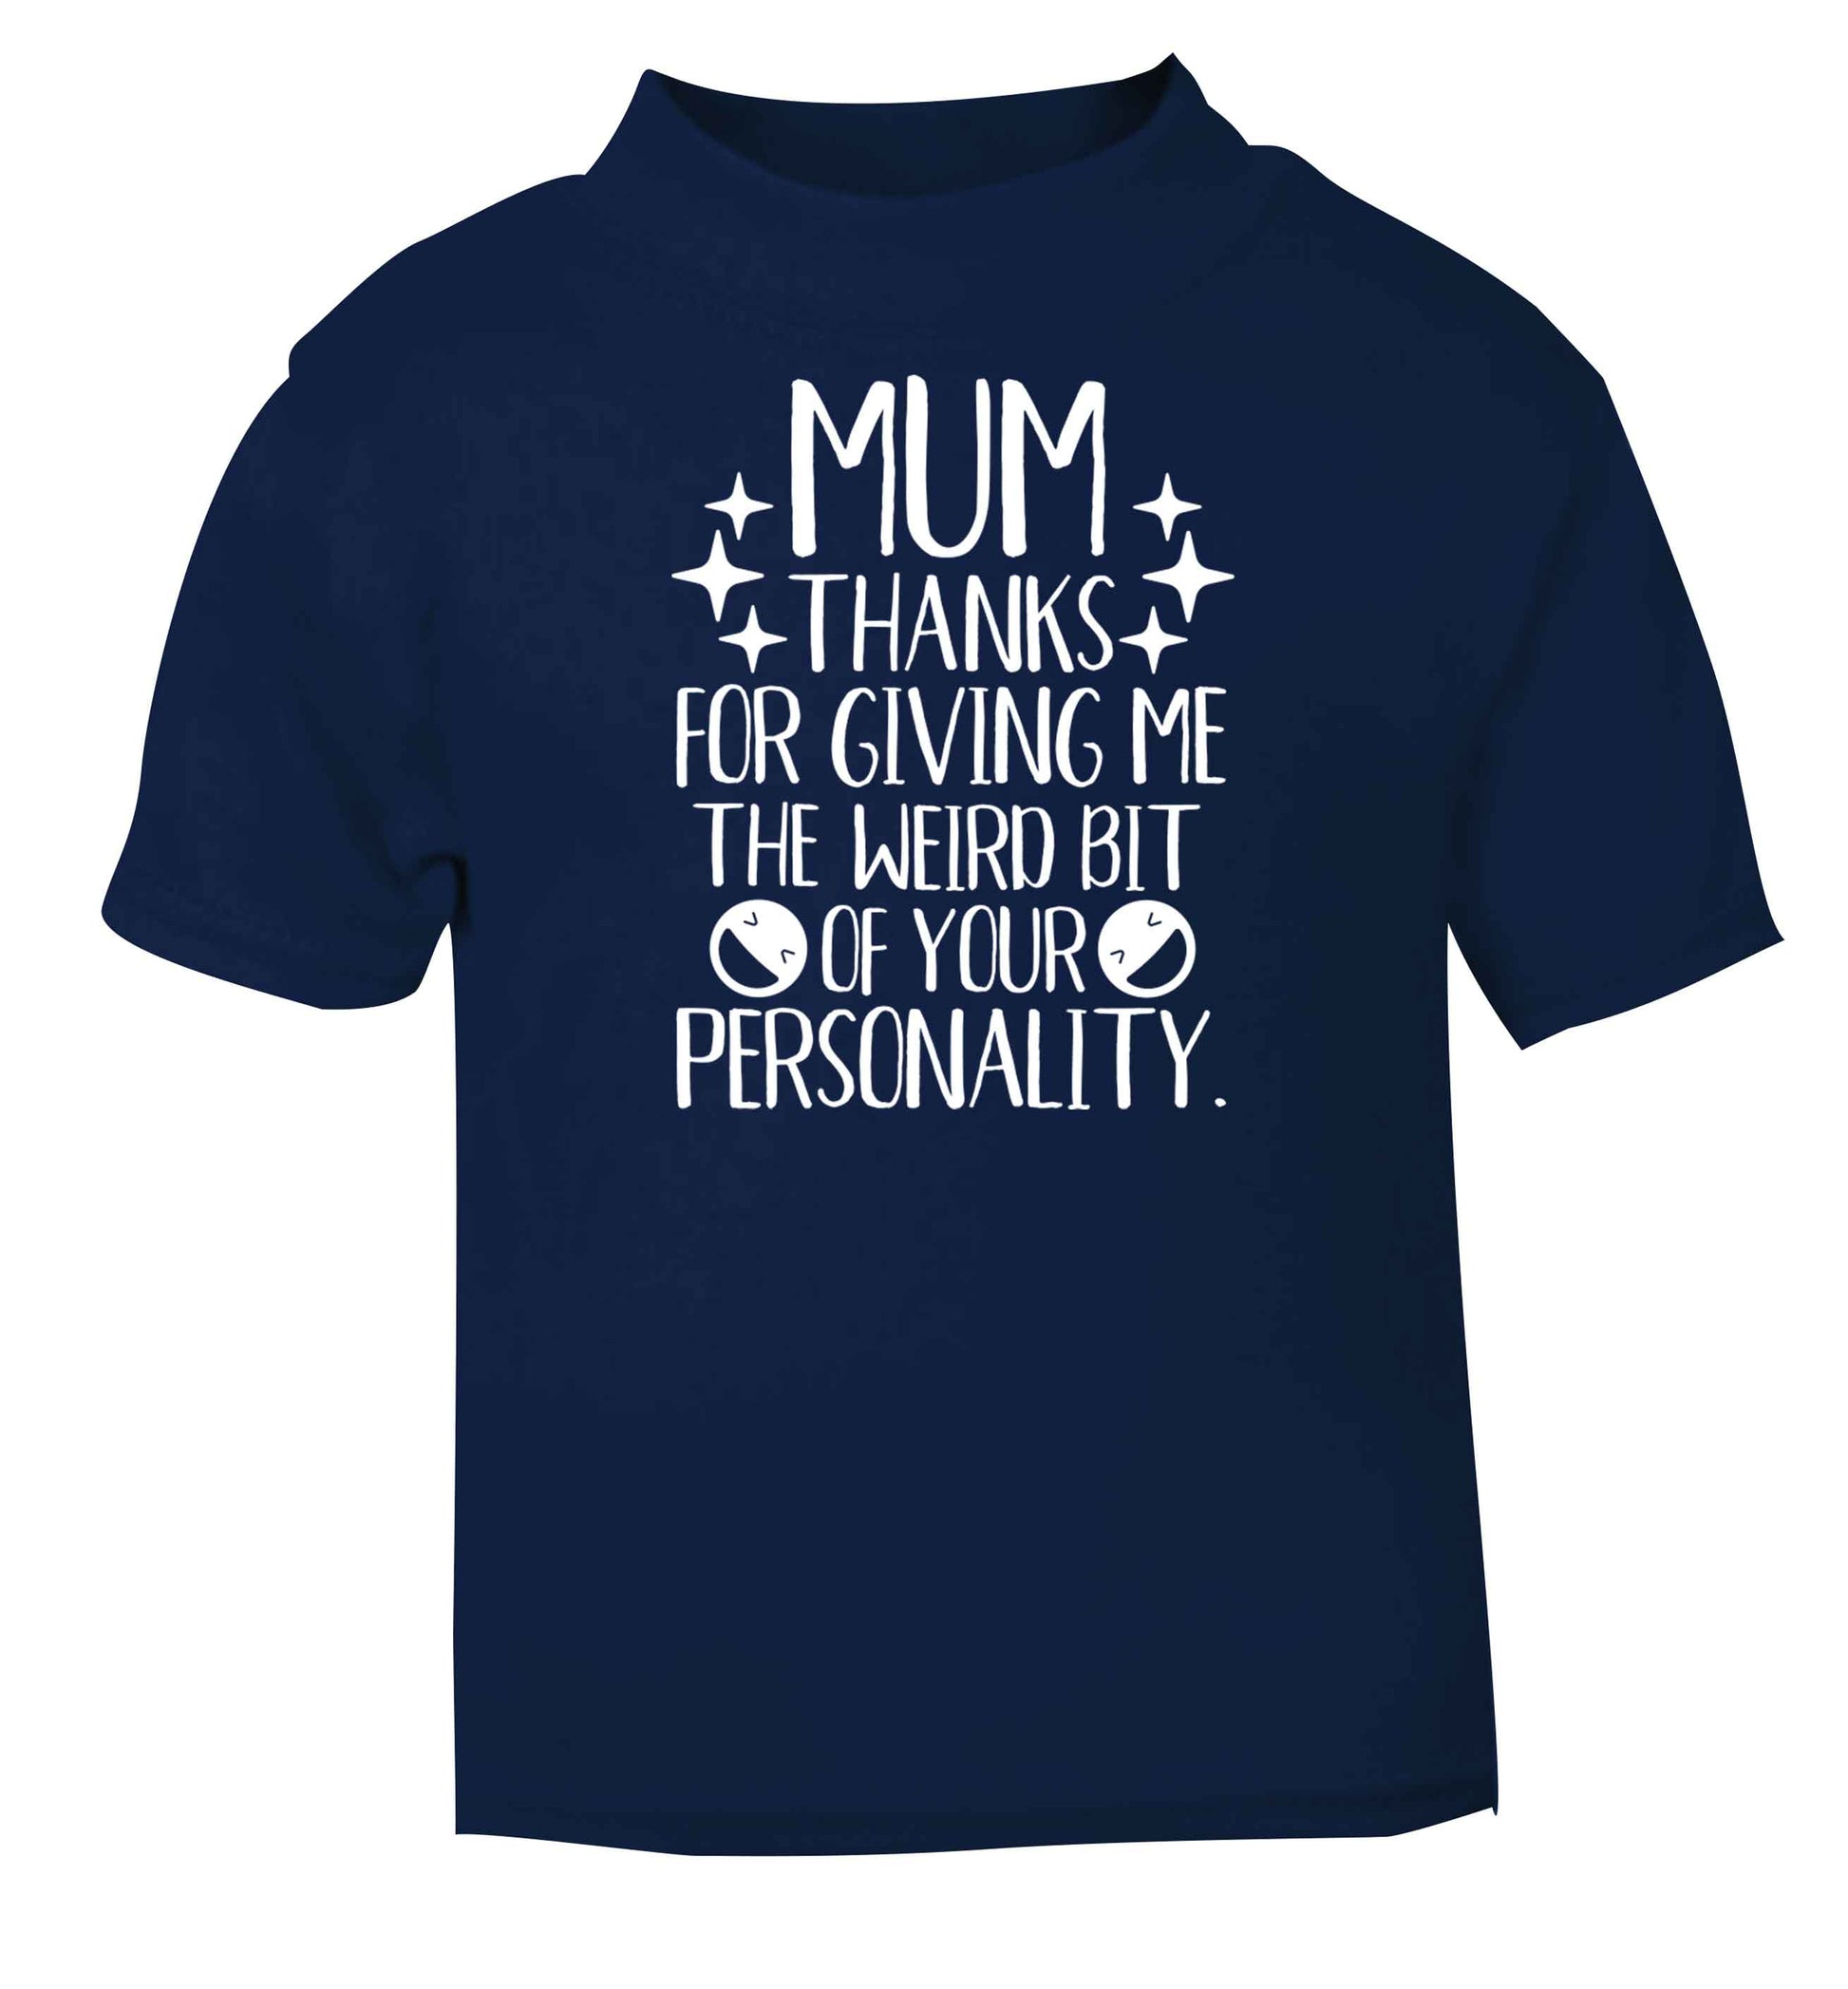 Mum, I love you more than halloumi and if you know me at all you know how deep that is navy baby toddler Tshirt 2 Years